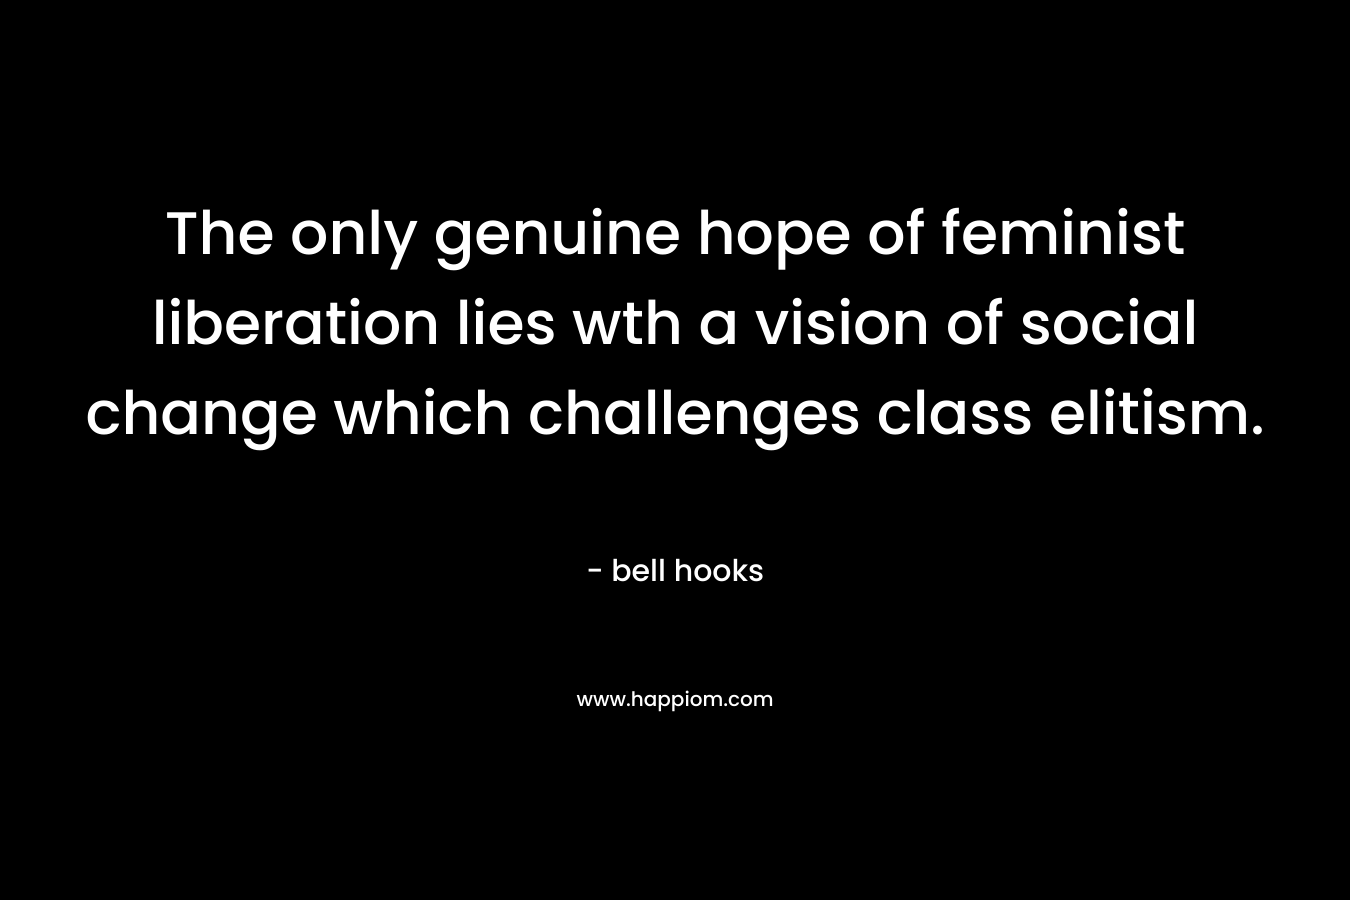 The only genuine hope of feminist liberation lies wth a vision of social change which challenges class elitism.